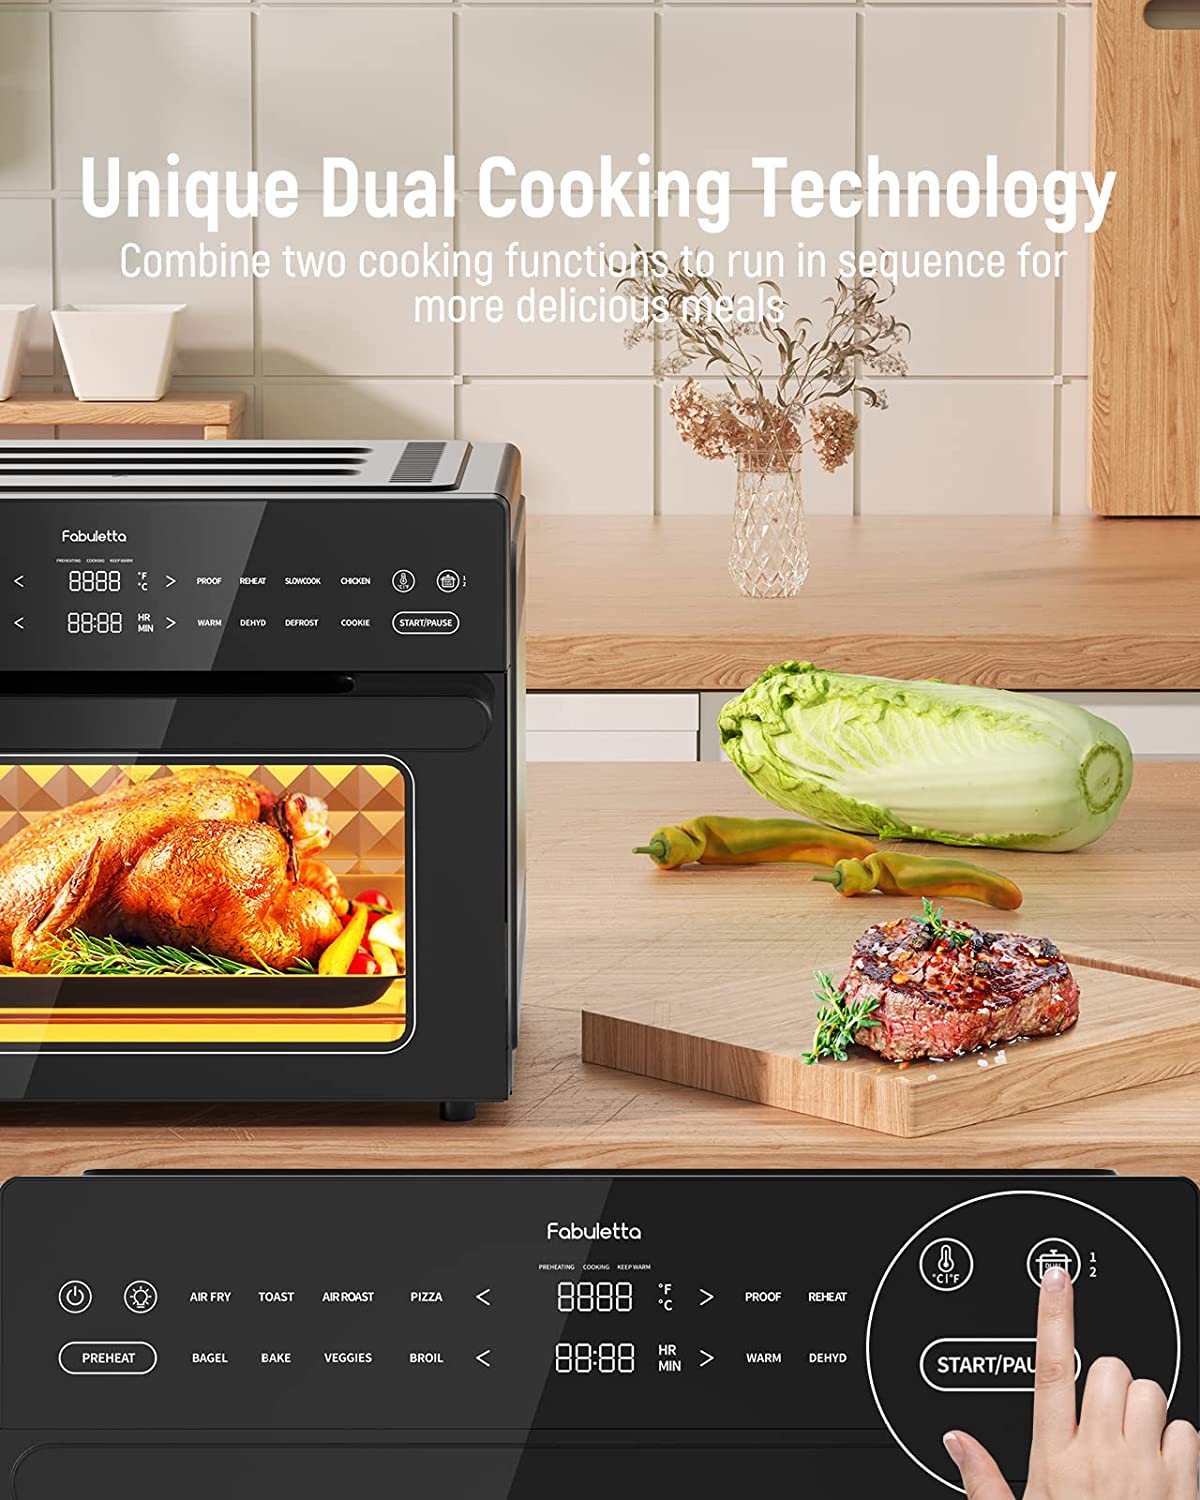 Air Fryer Toaster Oven, Smart 32QT Large Stainless Steel Convection Oven,Black  .